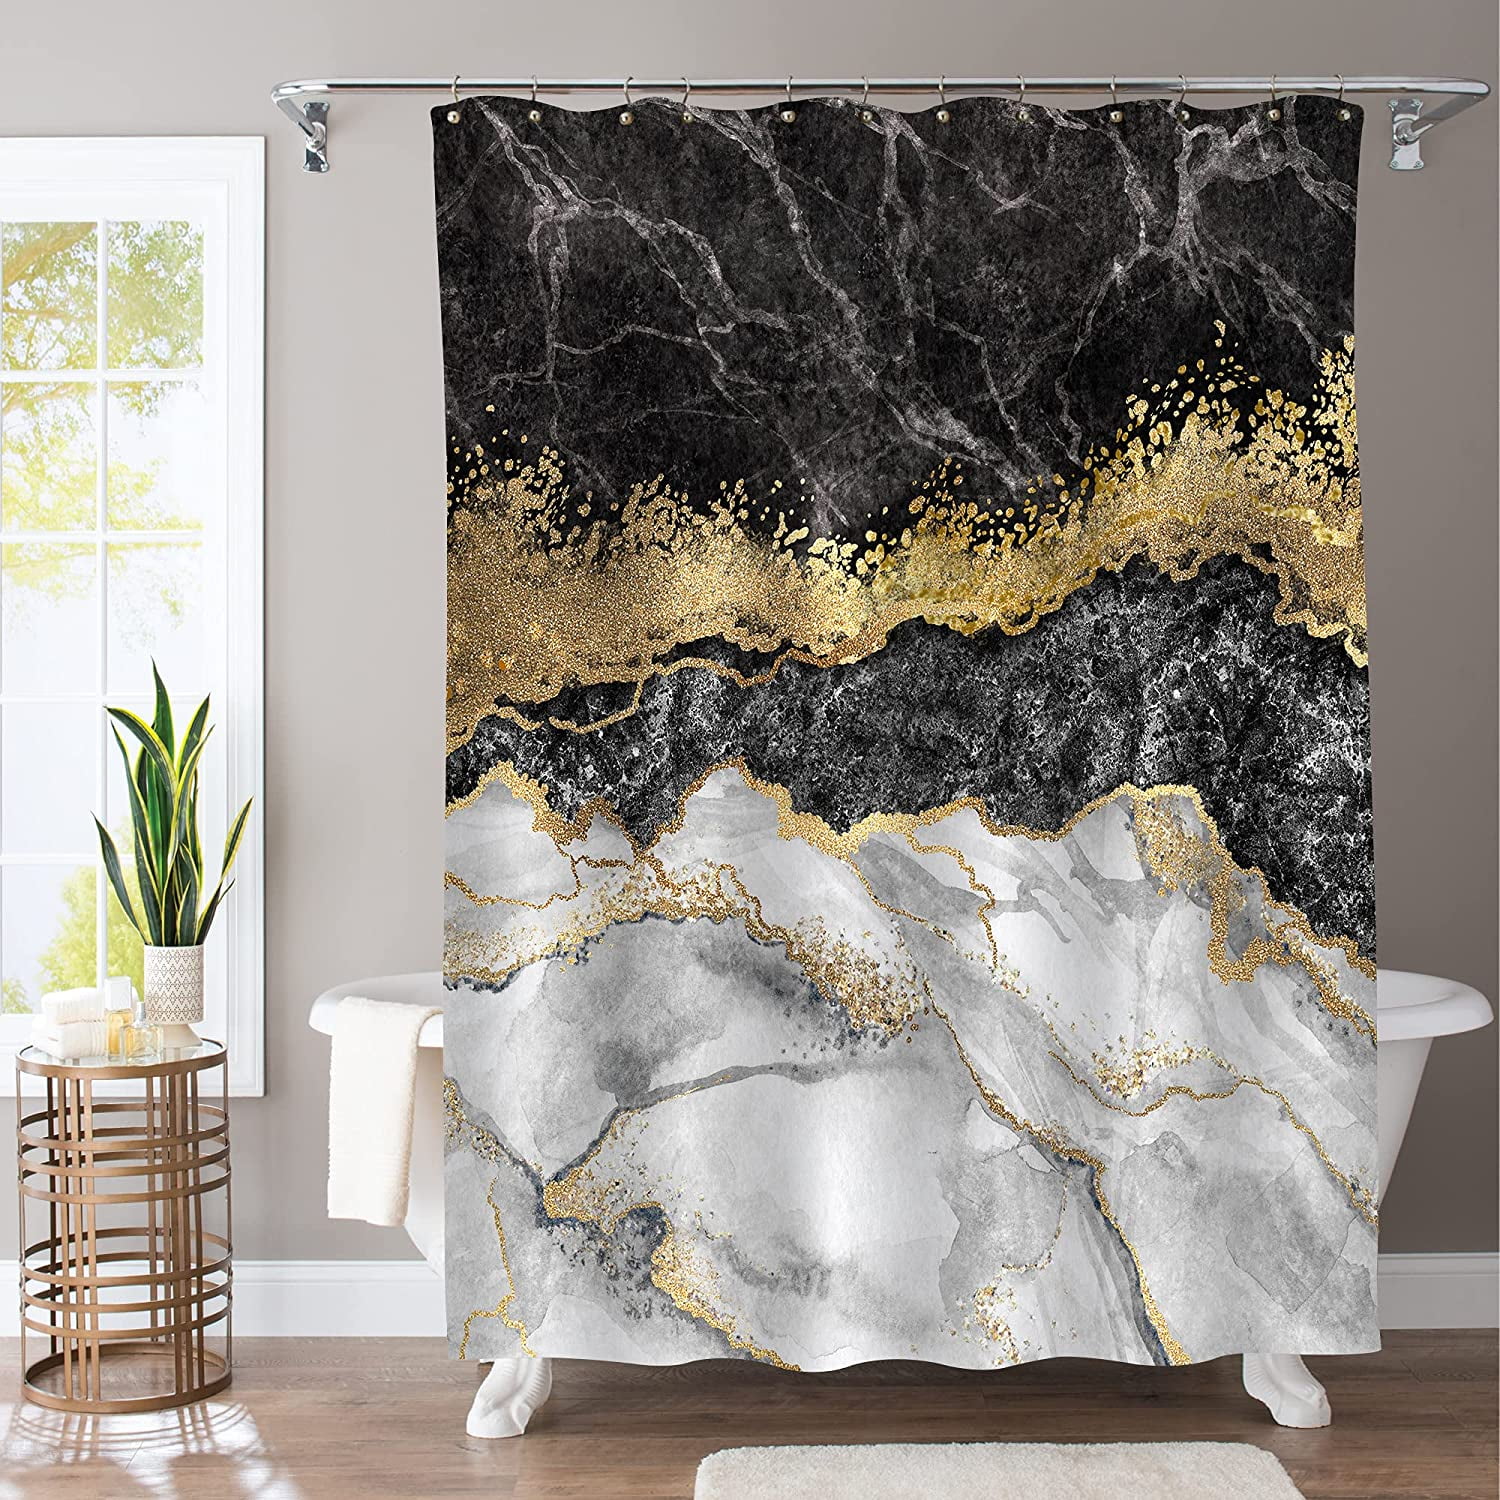 Gold Maple Leaf Picture Bathroom Fabric Shower Curtain Set 71Inches Long 